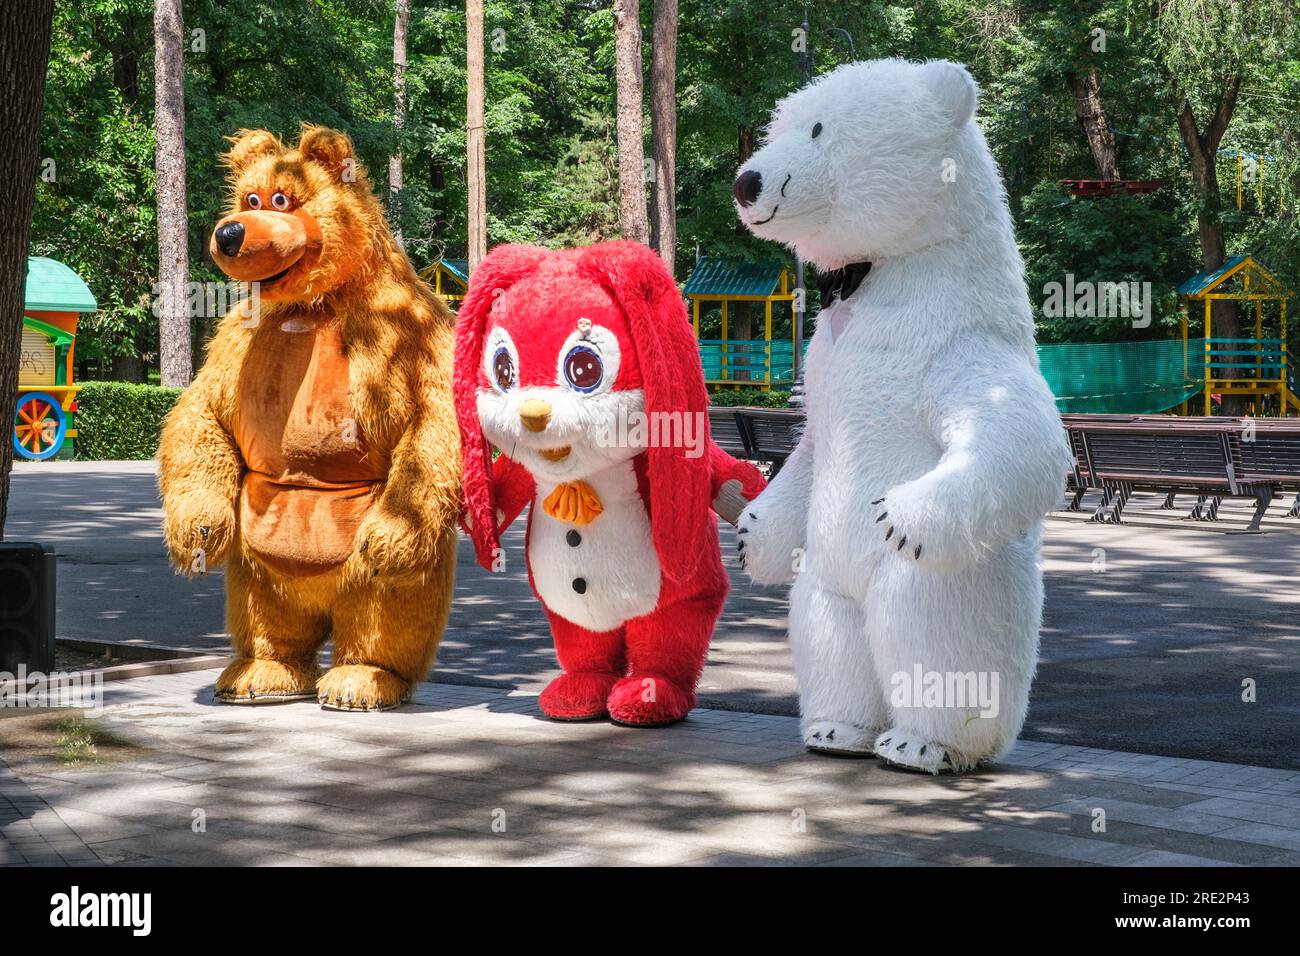 Kazakhstan, Almaty. Central Park for Culture and Recreation. Welcoming Figures in Animal Costumes. Stock Photo